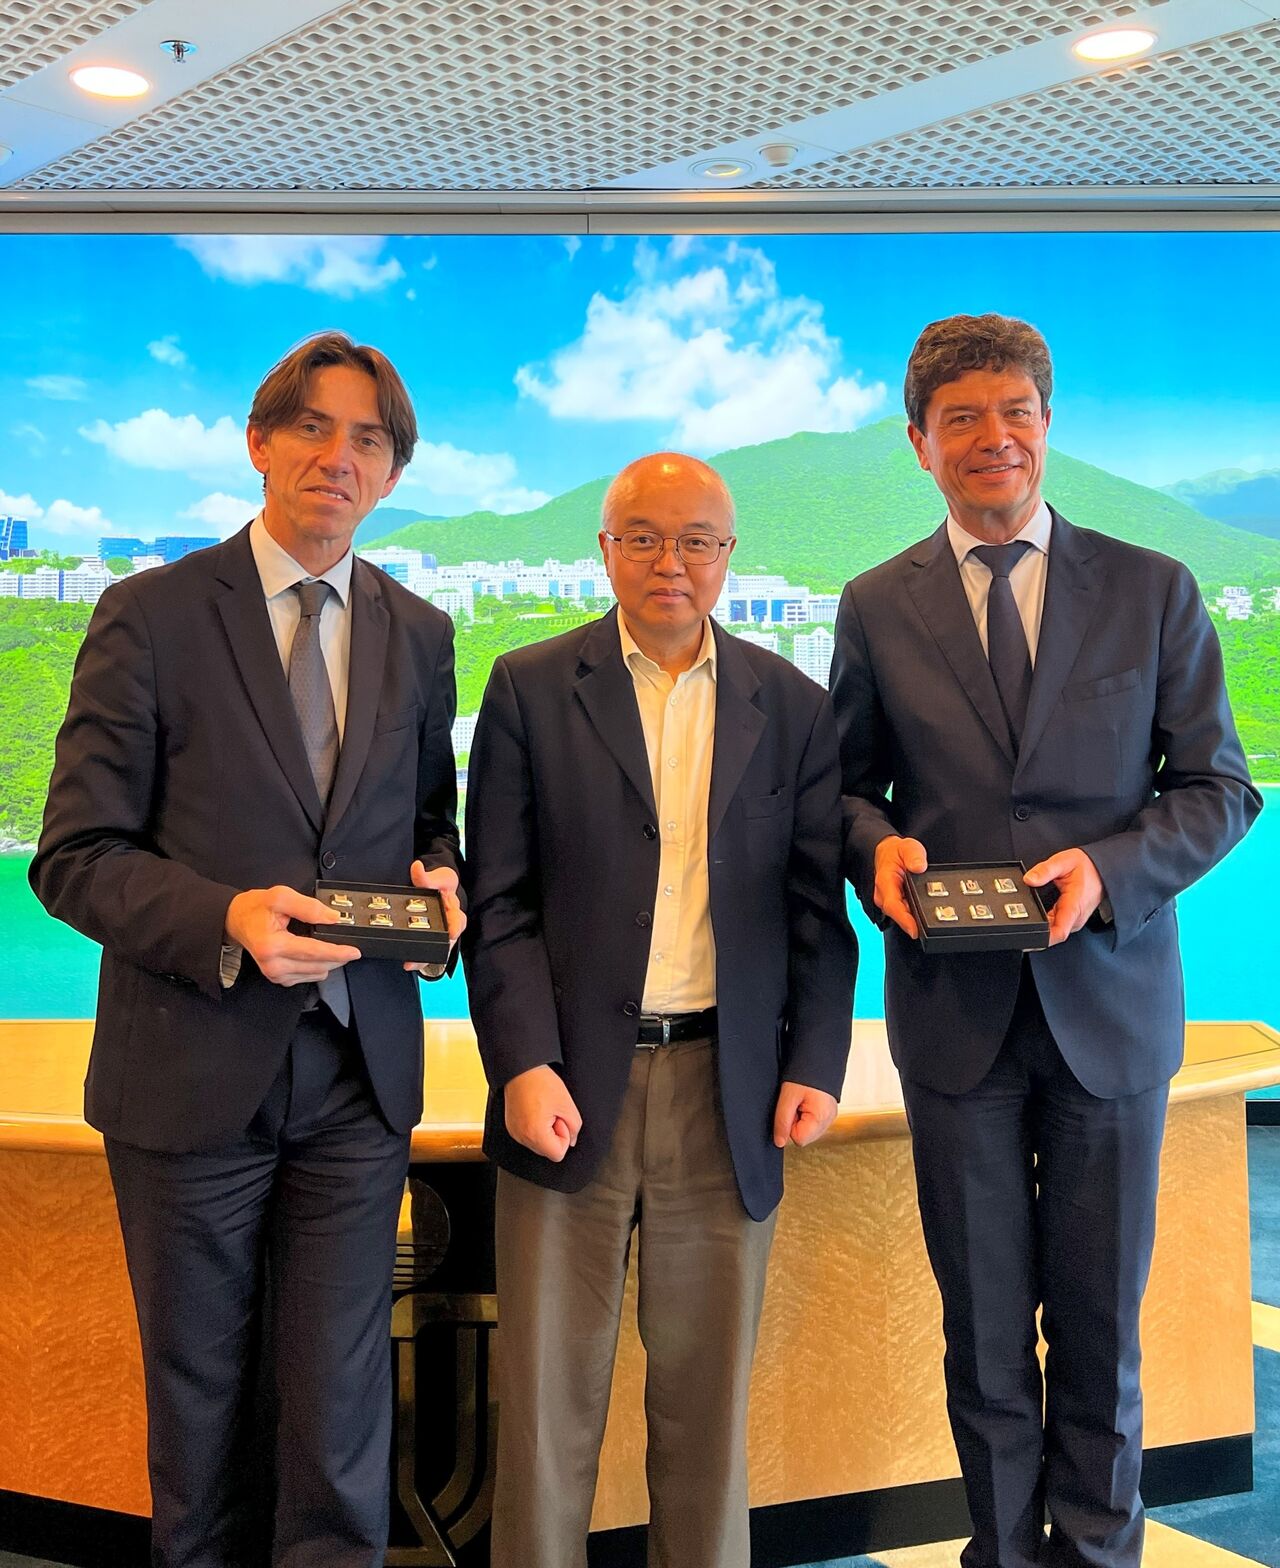 HKUST Vice President for Institutional Advancement Prof. WANG Yang (center) presented HKUST souvenirs to Prof. Dean LEWIS (left), the Executive Committee Vice President of France Universités and President of Université de Bordeaux, and Prof. Jean-François HUCHET(right), Member of the International Commission of France Universités.